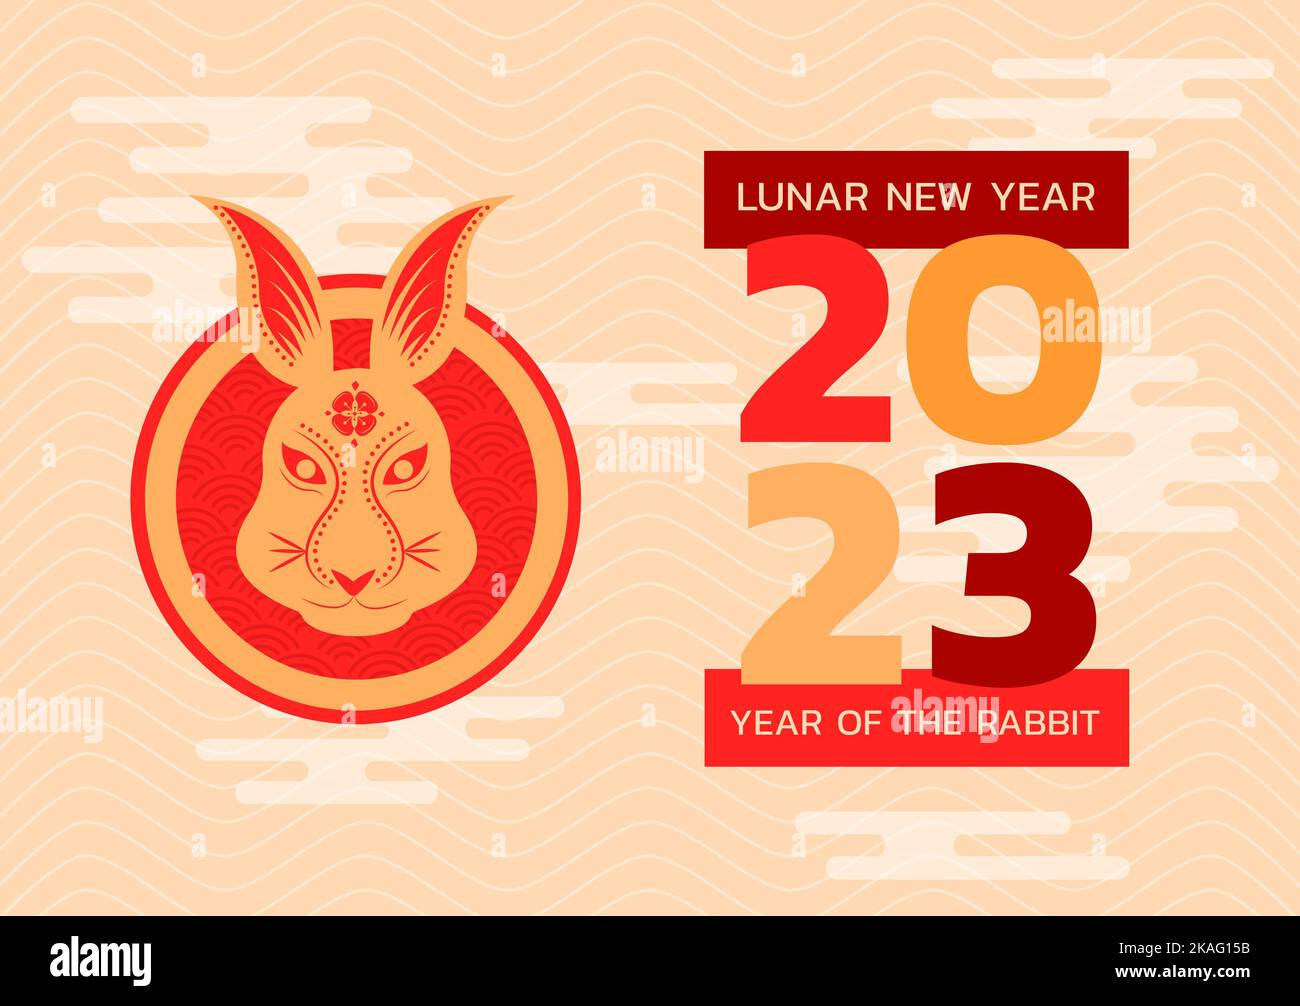 Composition of happy lunar new year 2023 text over rabbit on beige background Stock Photo